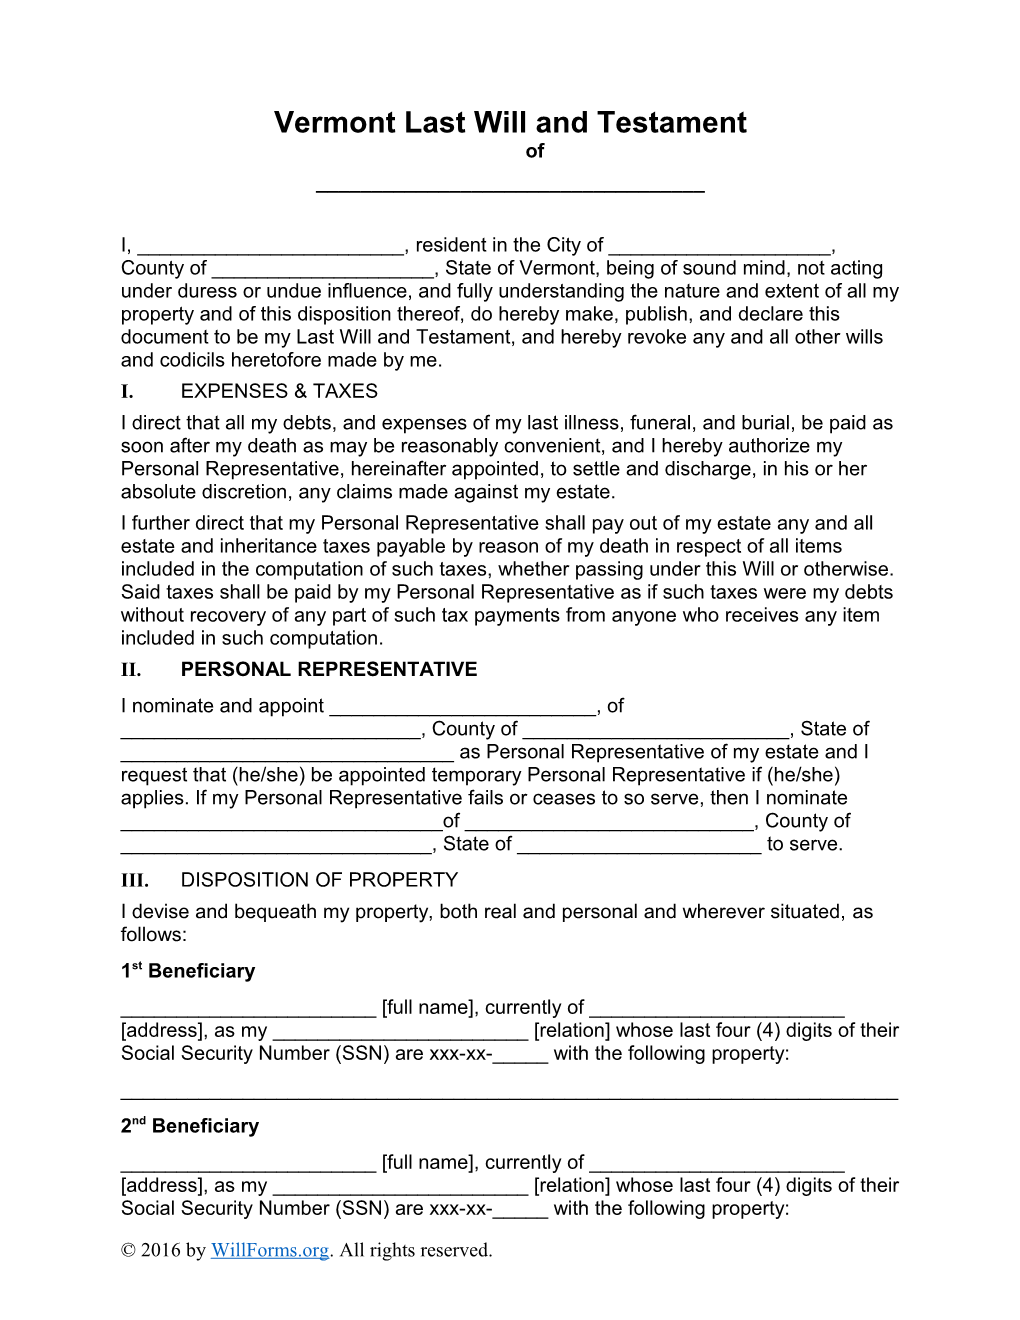 Vermont Last Will and Testament Form